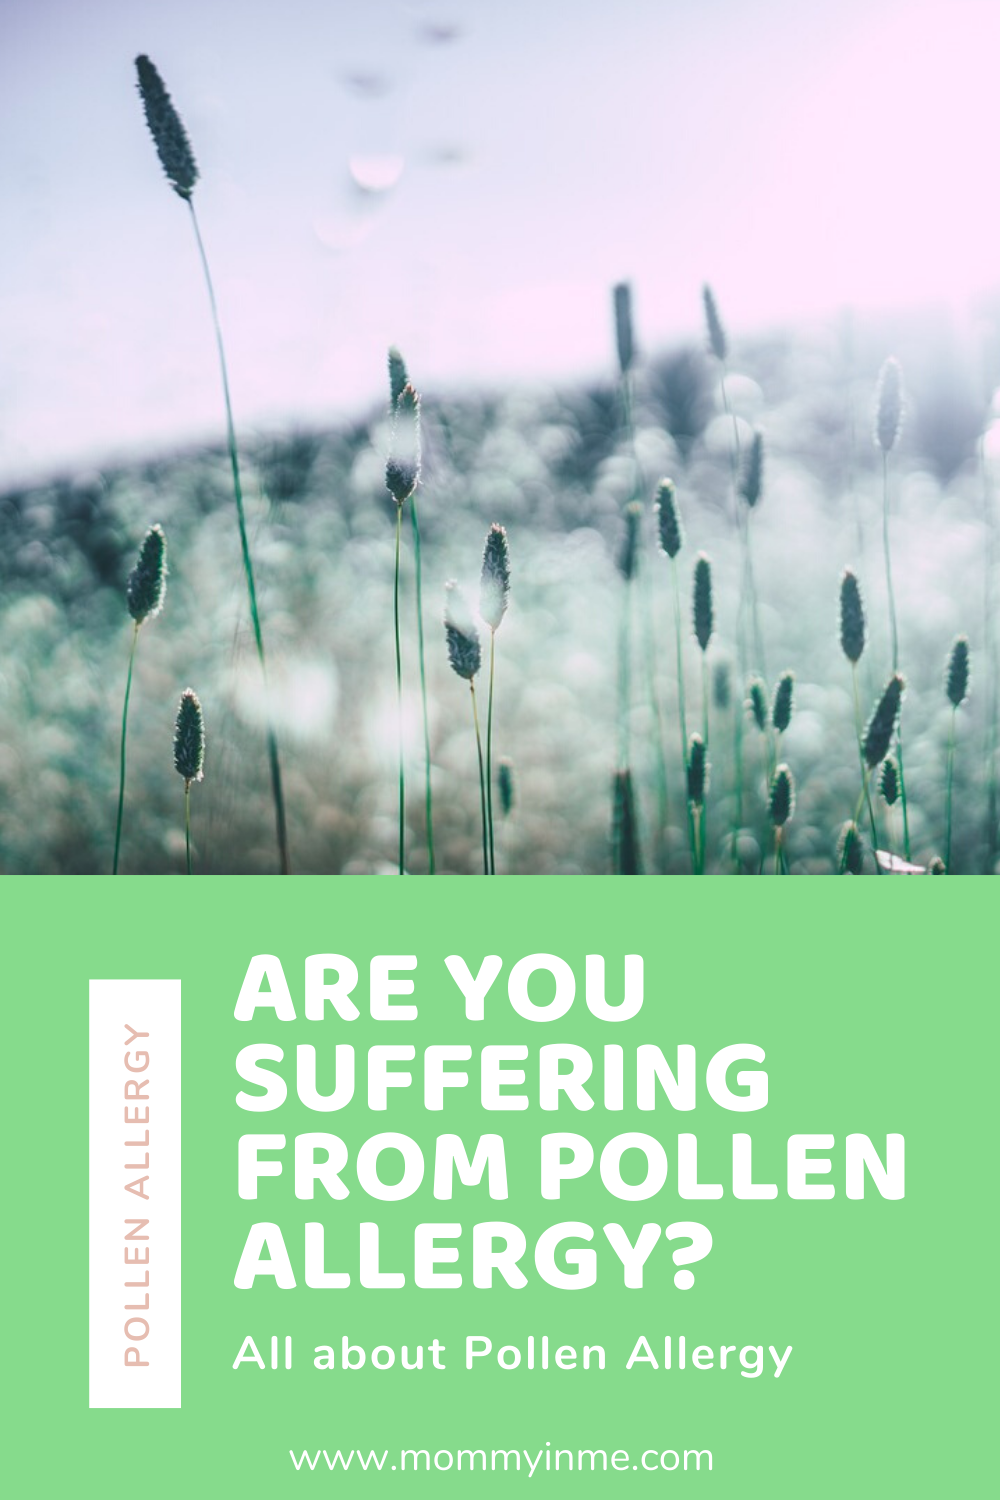 Are you suffering from seasonal allergy, precisely Pollen Allergy or Rhinitis in this Spring season? If yes, check out these precautions for a better health #pollenallergy #hayfever #rhinitis #sinusitis #seasonalallergy #allergy #zyrtec #antihistamines